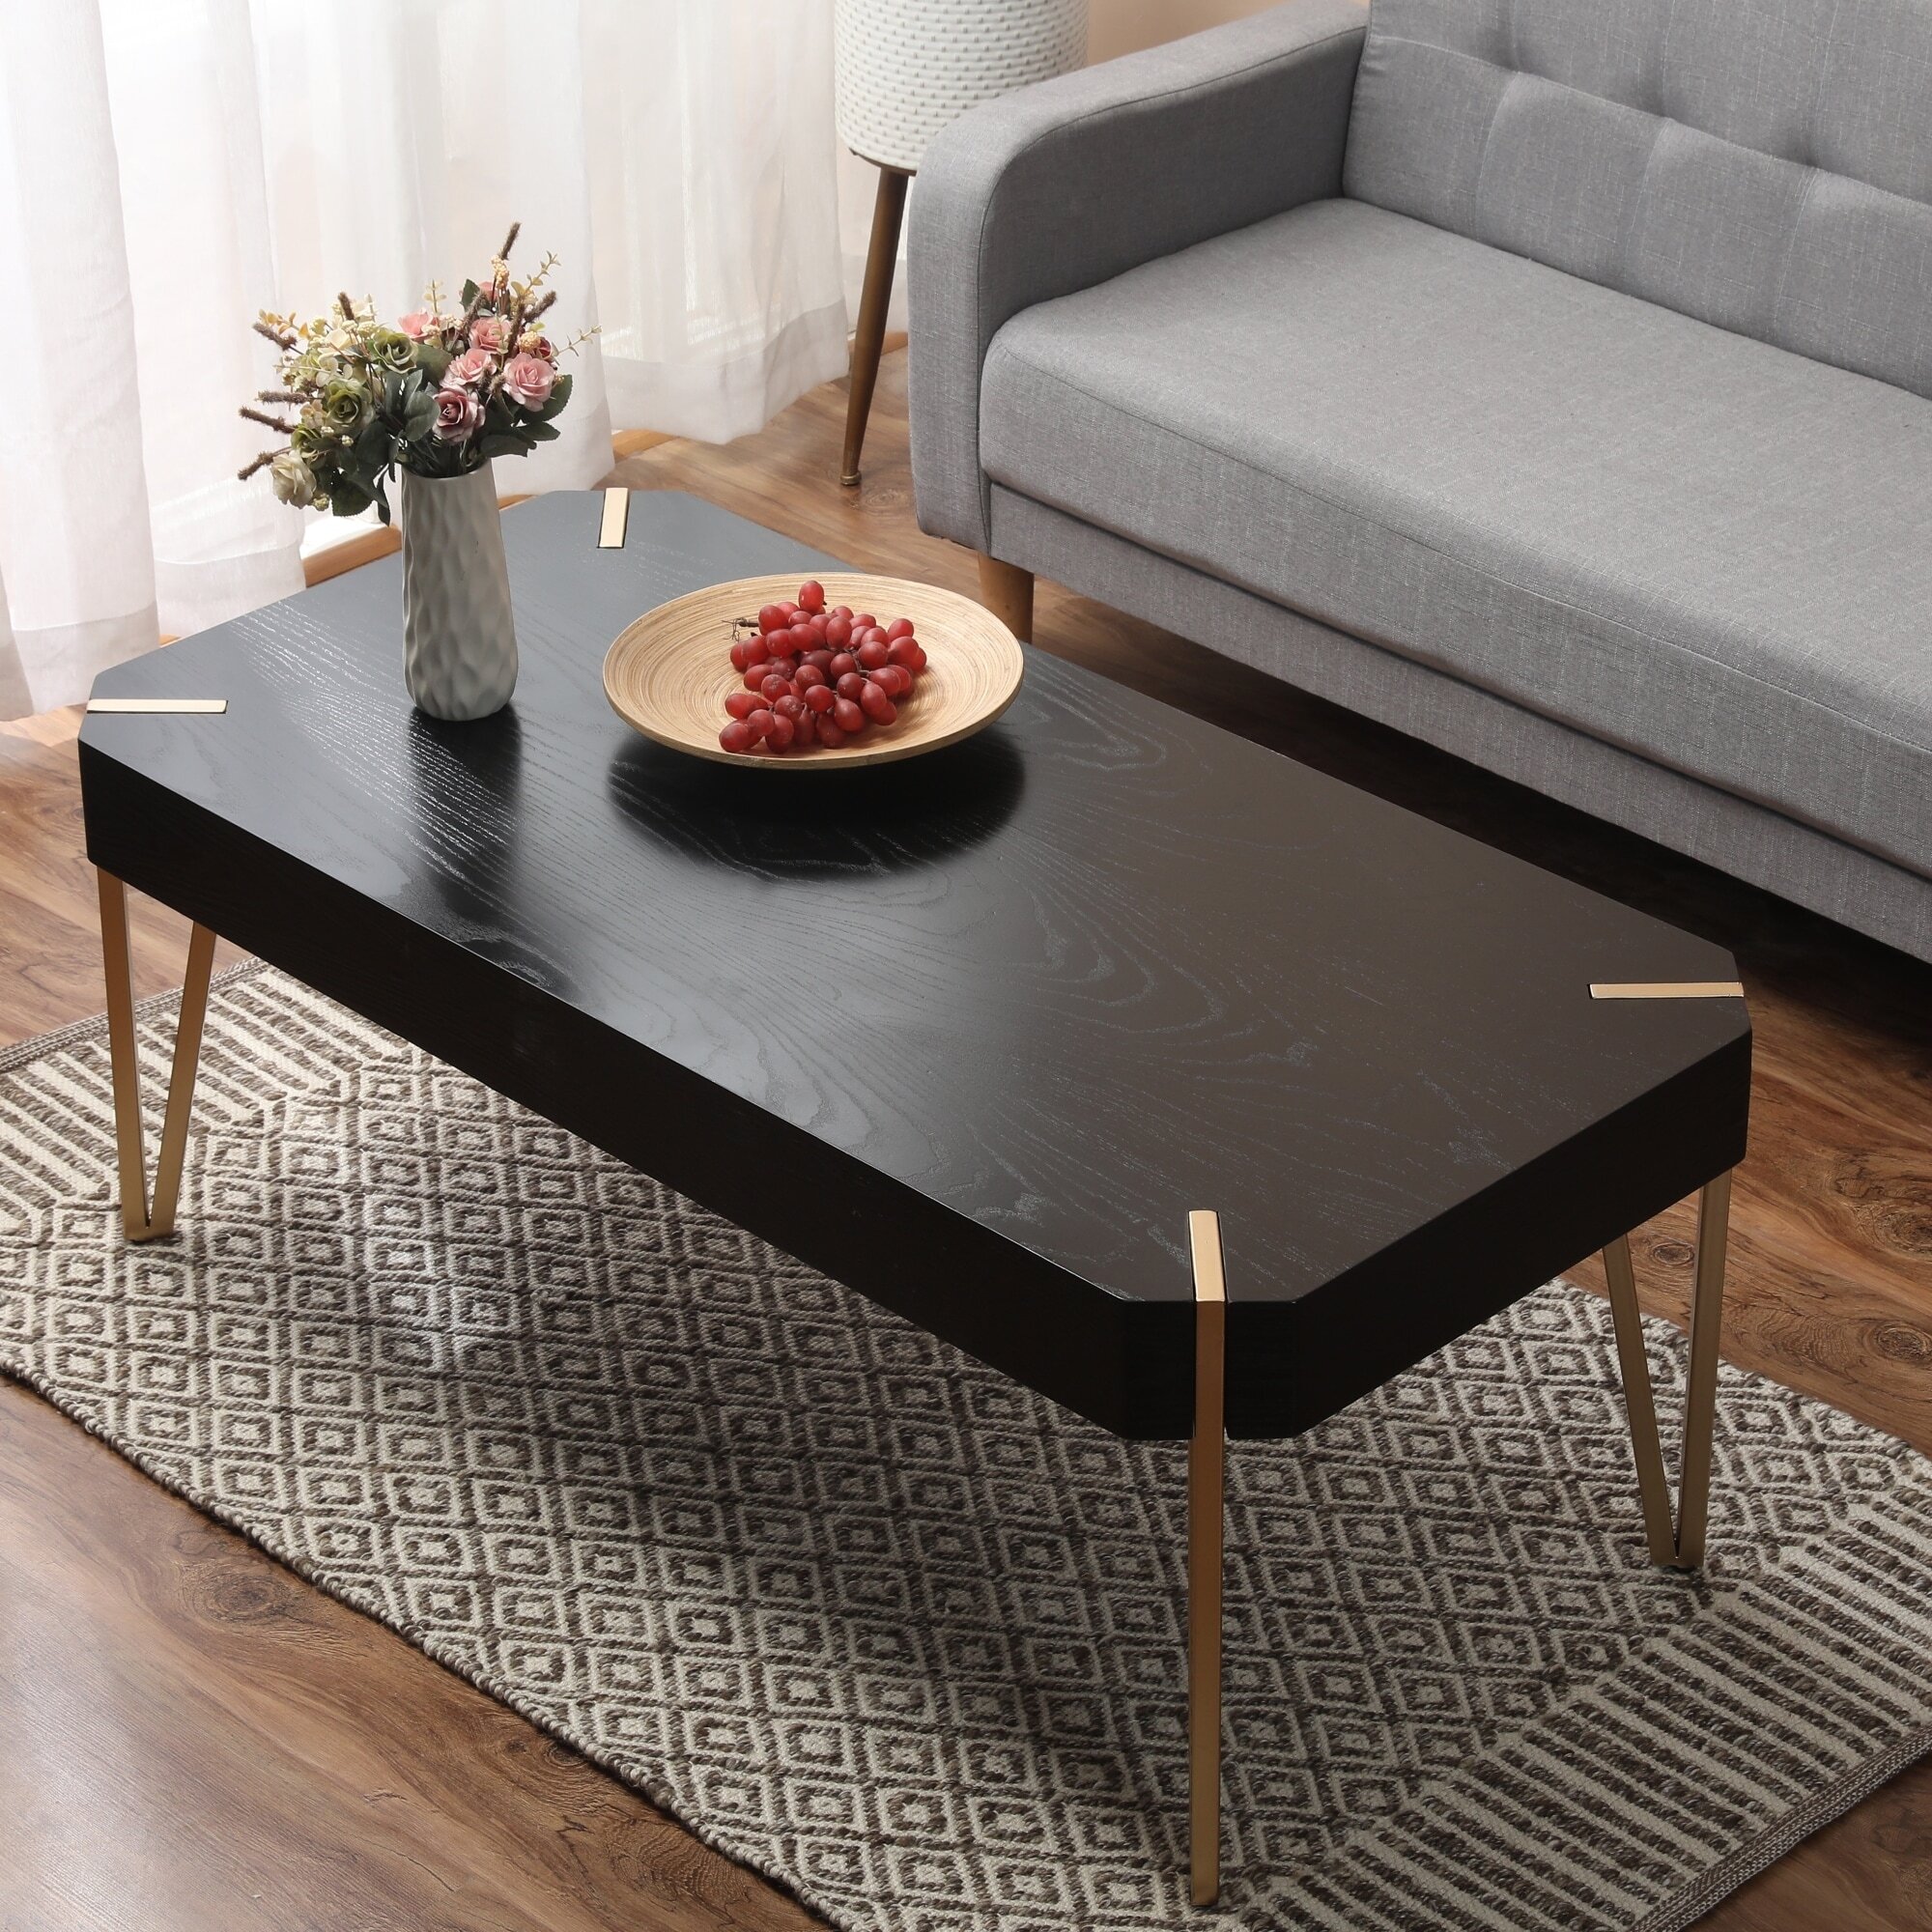 Dark wooden coffee table with gilded metal legs